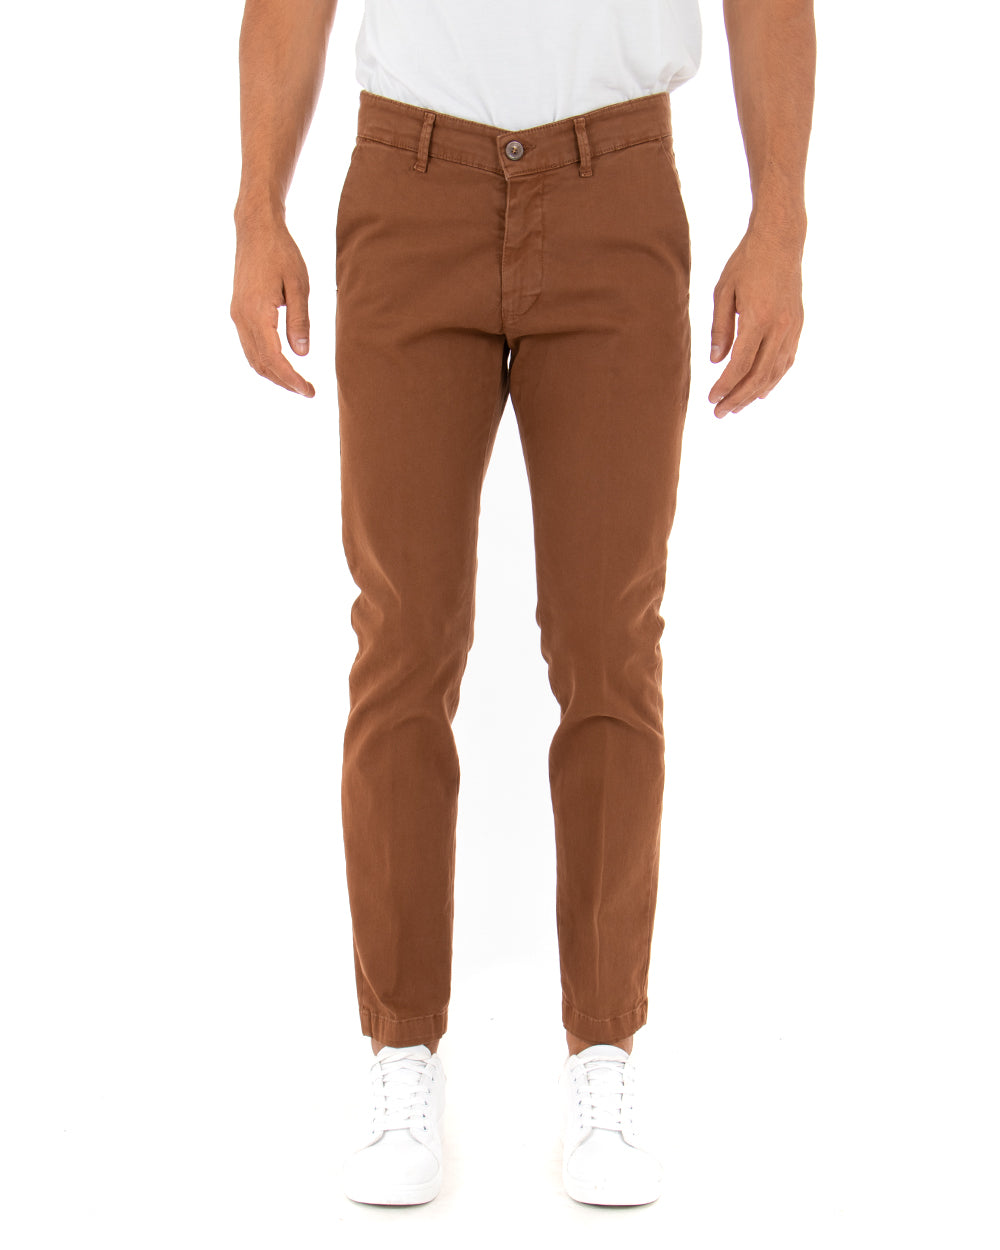 Classic Men's Solid Color Long Casual Trousers Camel Basic GIOSAL